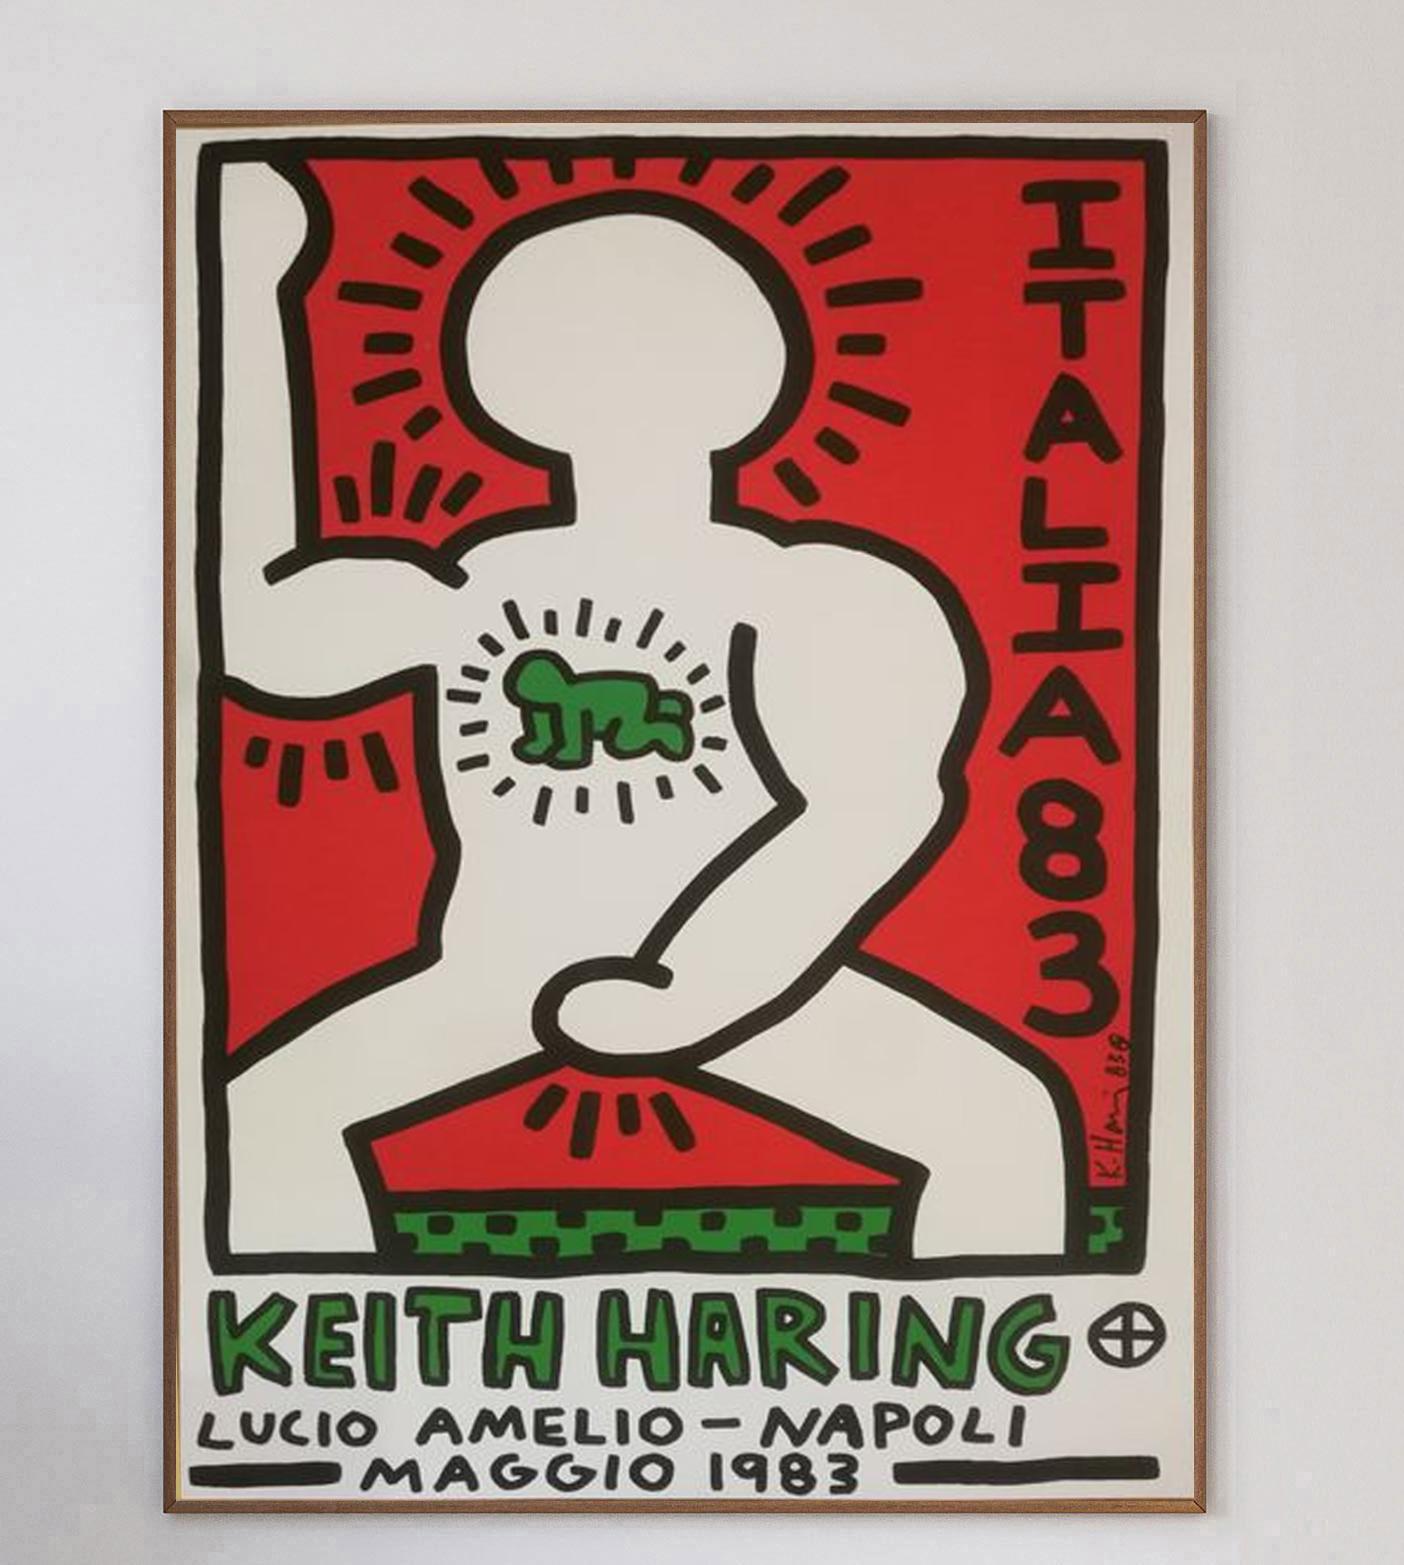 Beautiful lithograph promoting Keith Haring’s exhibition at the Lucio Amelio Gallery in Napoli, Italy in May 1983. The piece is printed on heavy art stock paper and is also signed and dated in the plate by the artist. Featuring typically bold